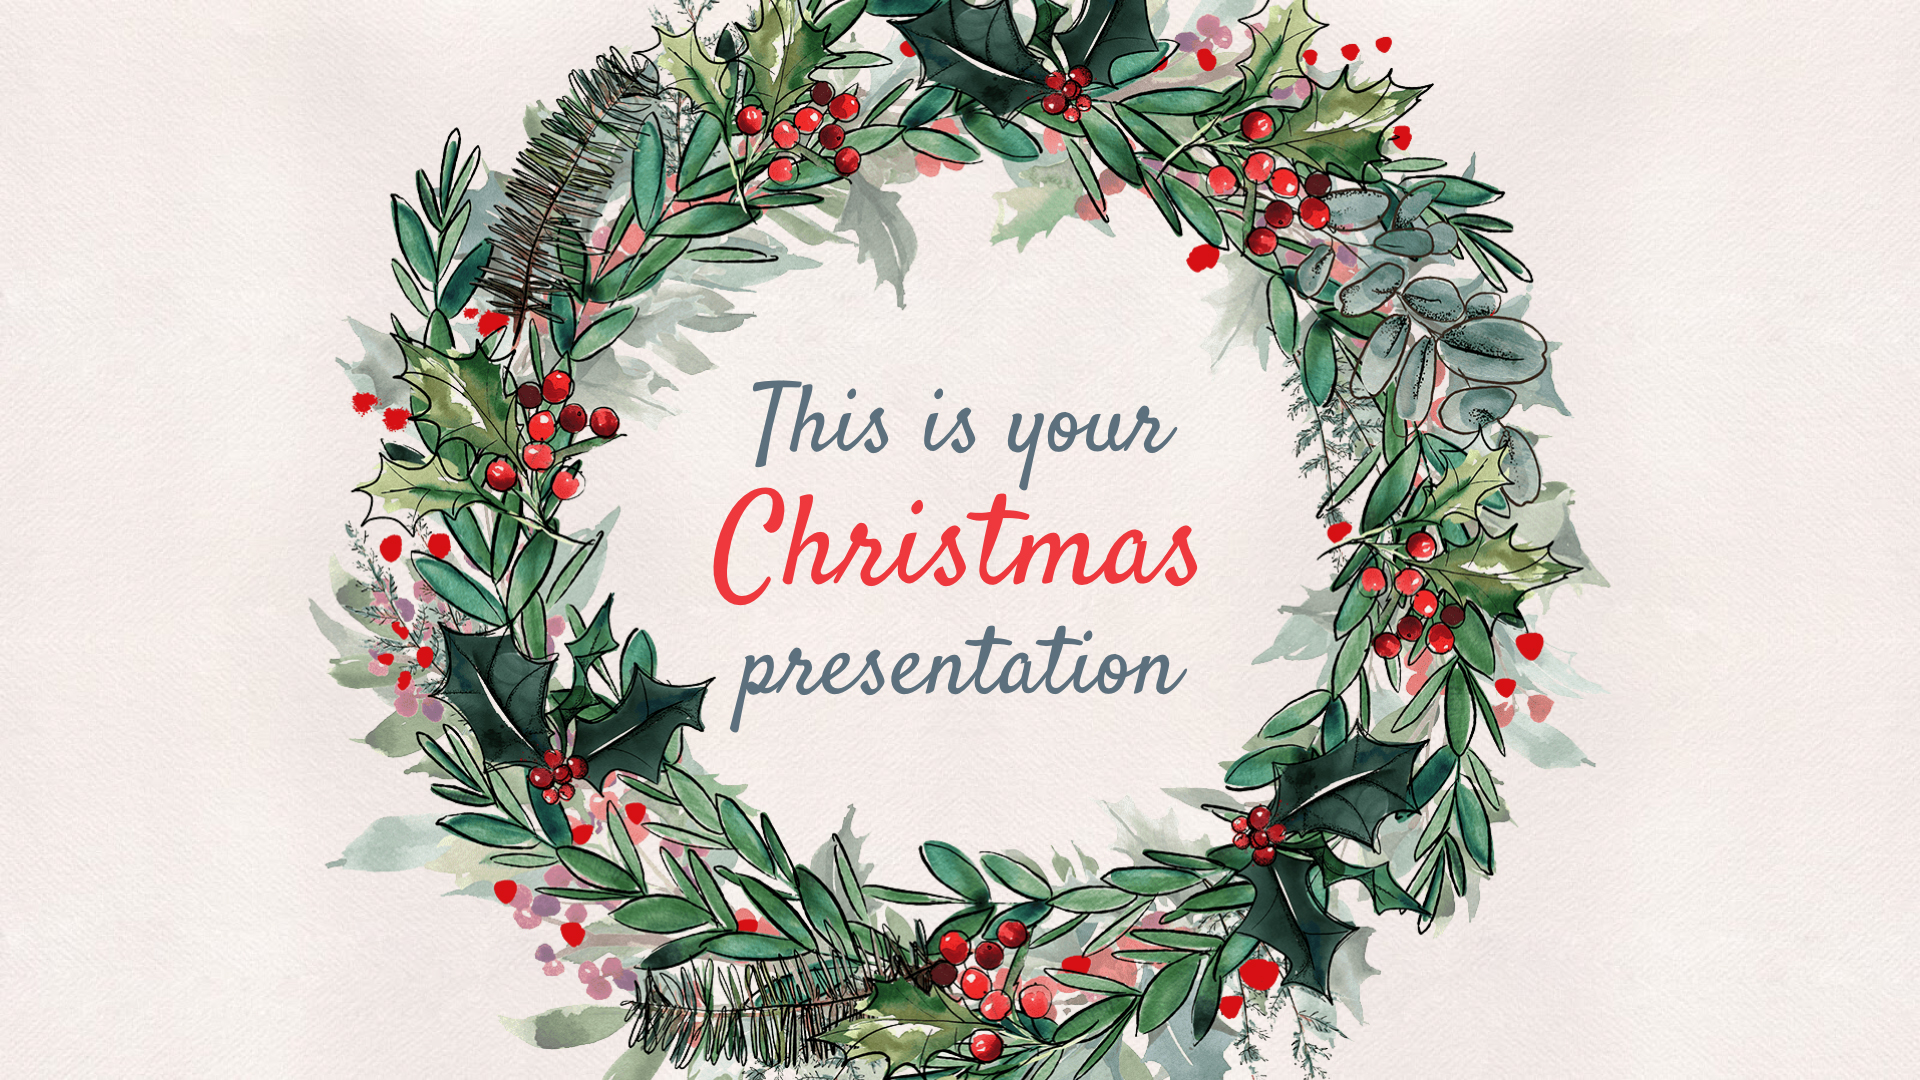 Festive powerpoint templates free download 2015 international residential code pdf download